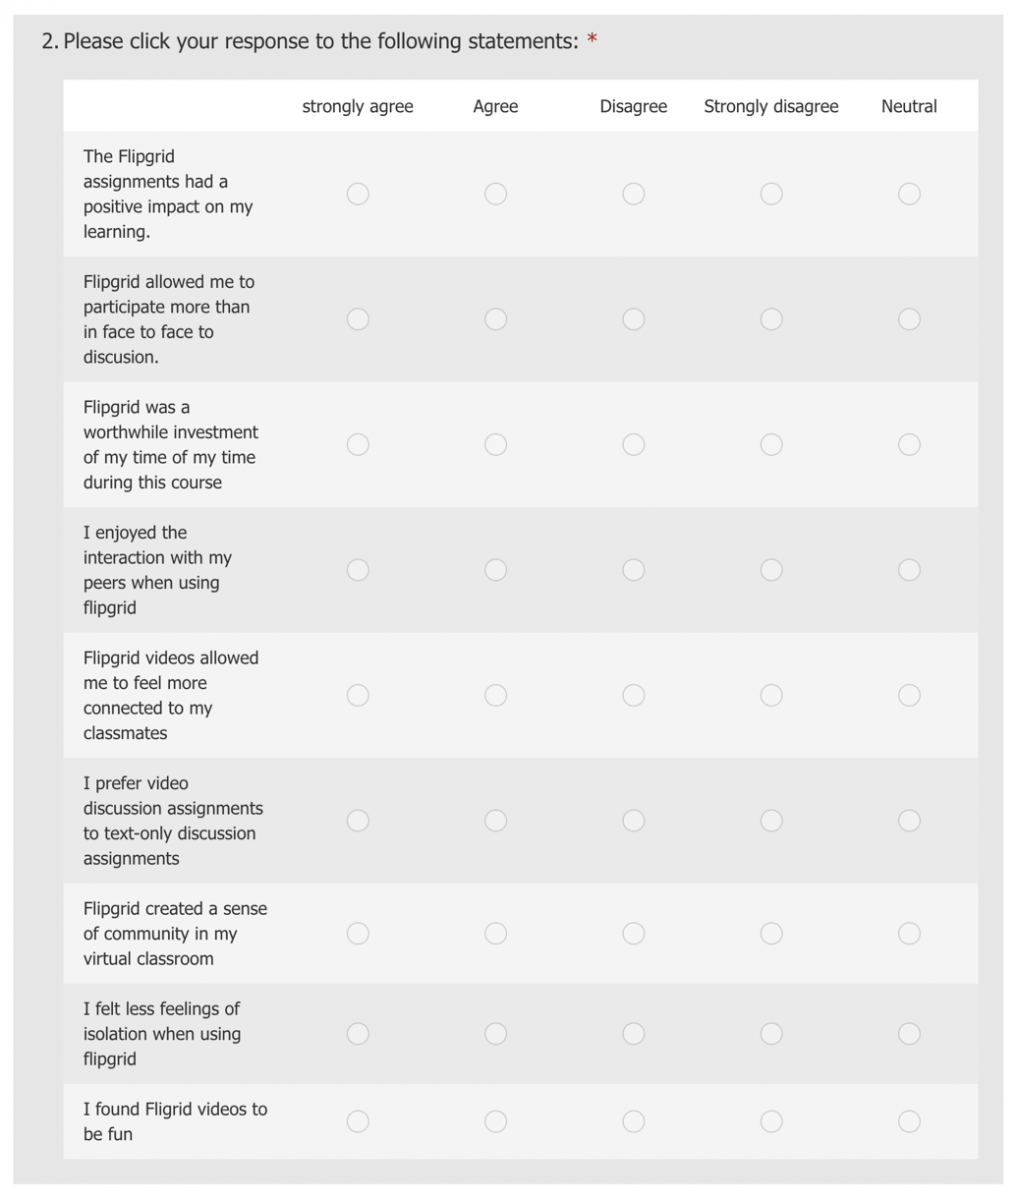 Image of Likert Scale questions :participants asked to strongly agree. agree, disagree, strongly disagree, or neutral to the following - The Flipgrid had a positive impact on my learning; Flipgrid allowed me to participate more than in face to face discussion; Flipgrip was a worthwhile investment of my time; I enjoyed the interaction with my peers; Flipgrid videos allowed me to feel more connected to classmates; I prefer video discussion assignments to text only discussion assignments; Flipgrid created a sense of community in my virtual classroom; I felt less feelings of isolation when using Flipgrid. I found Flipgrid videos to be fun.